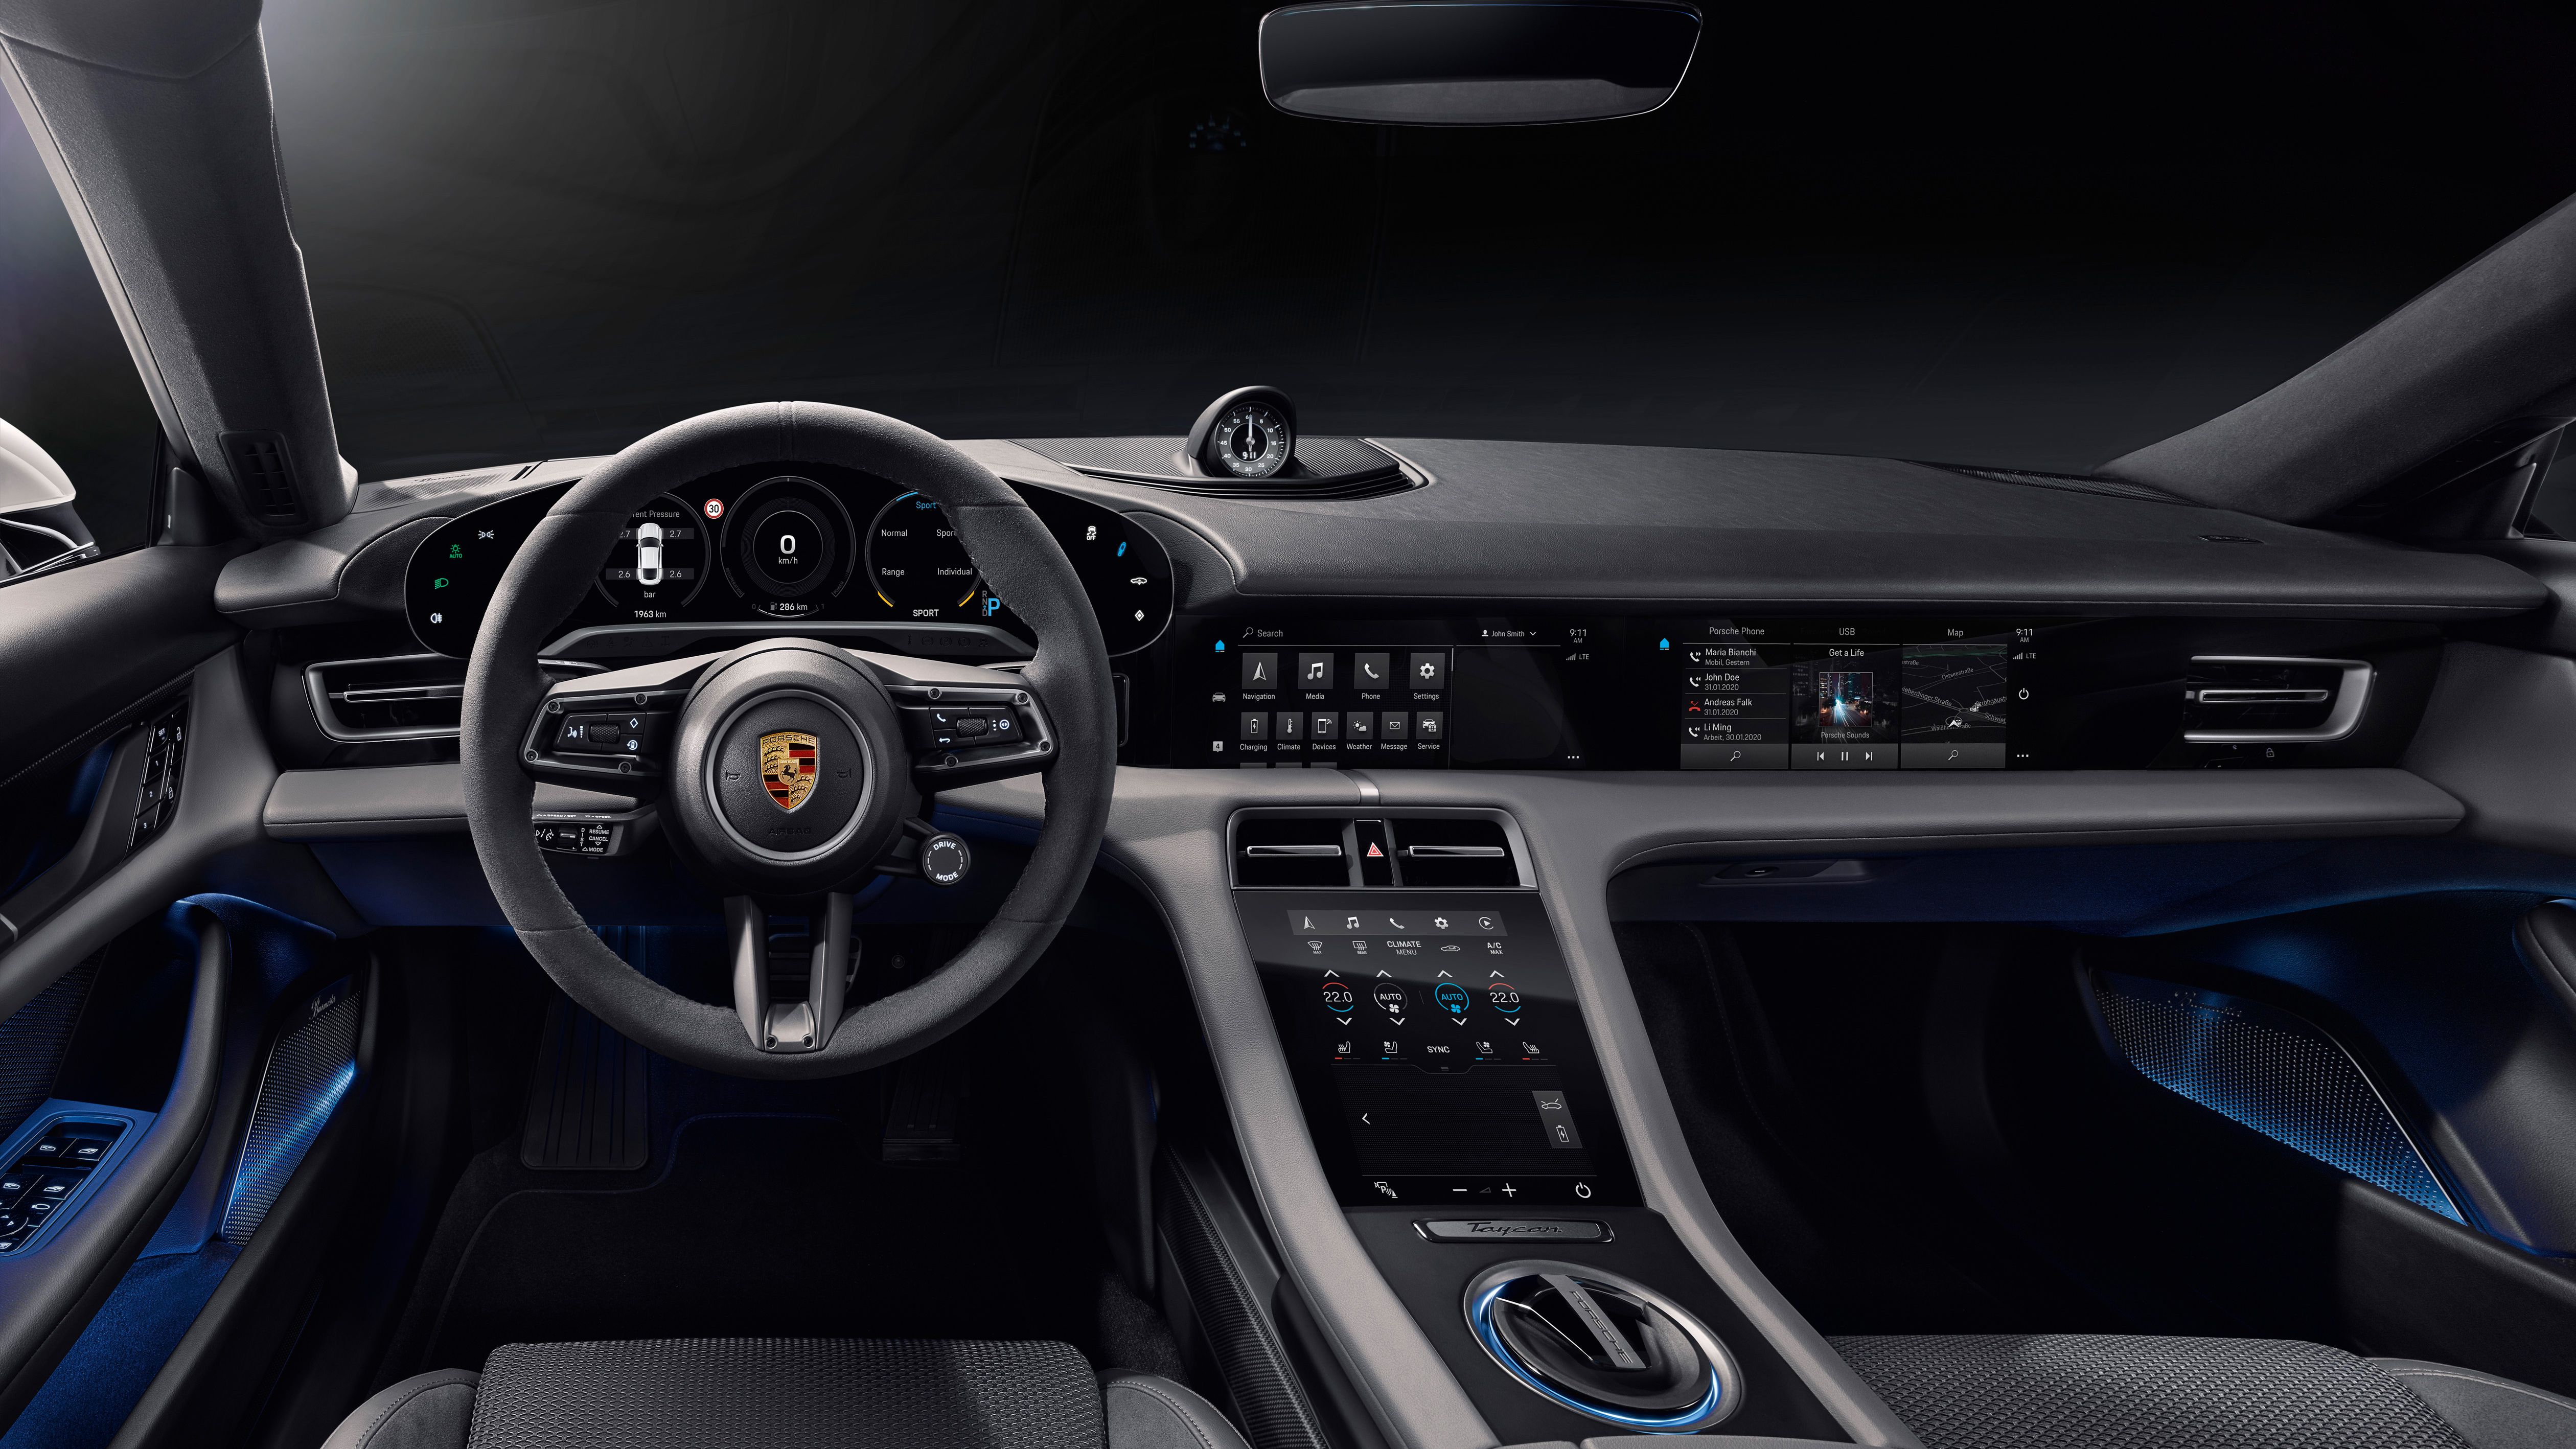 2020 - 2021 Porsche Taycan Walkaround - Your First Real Look at the Interior